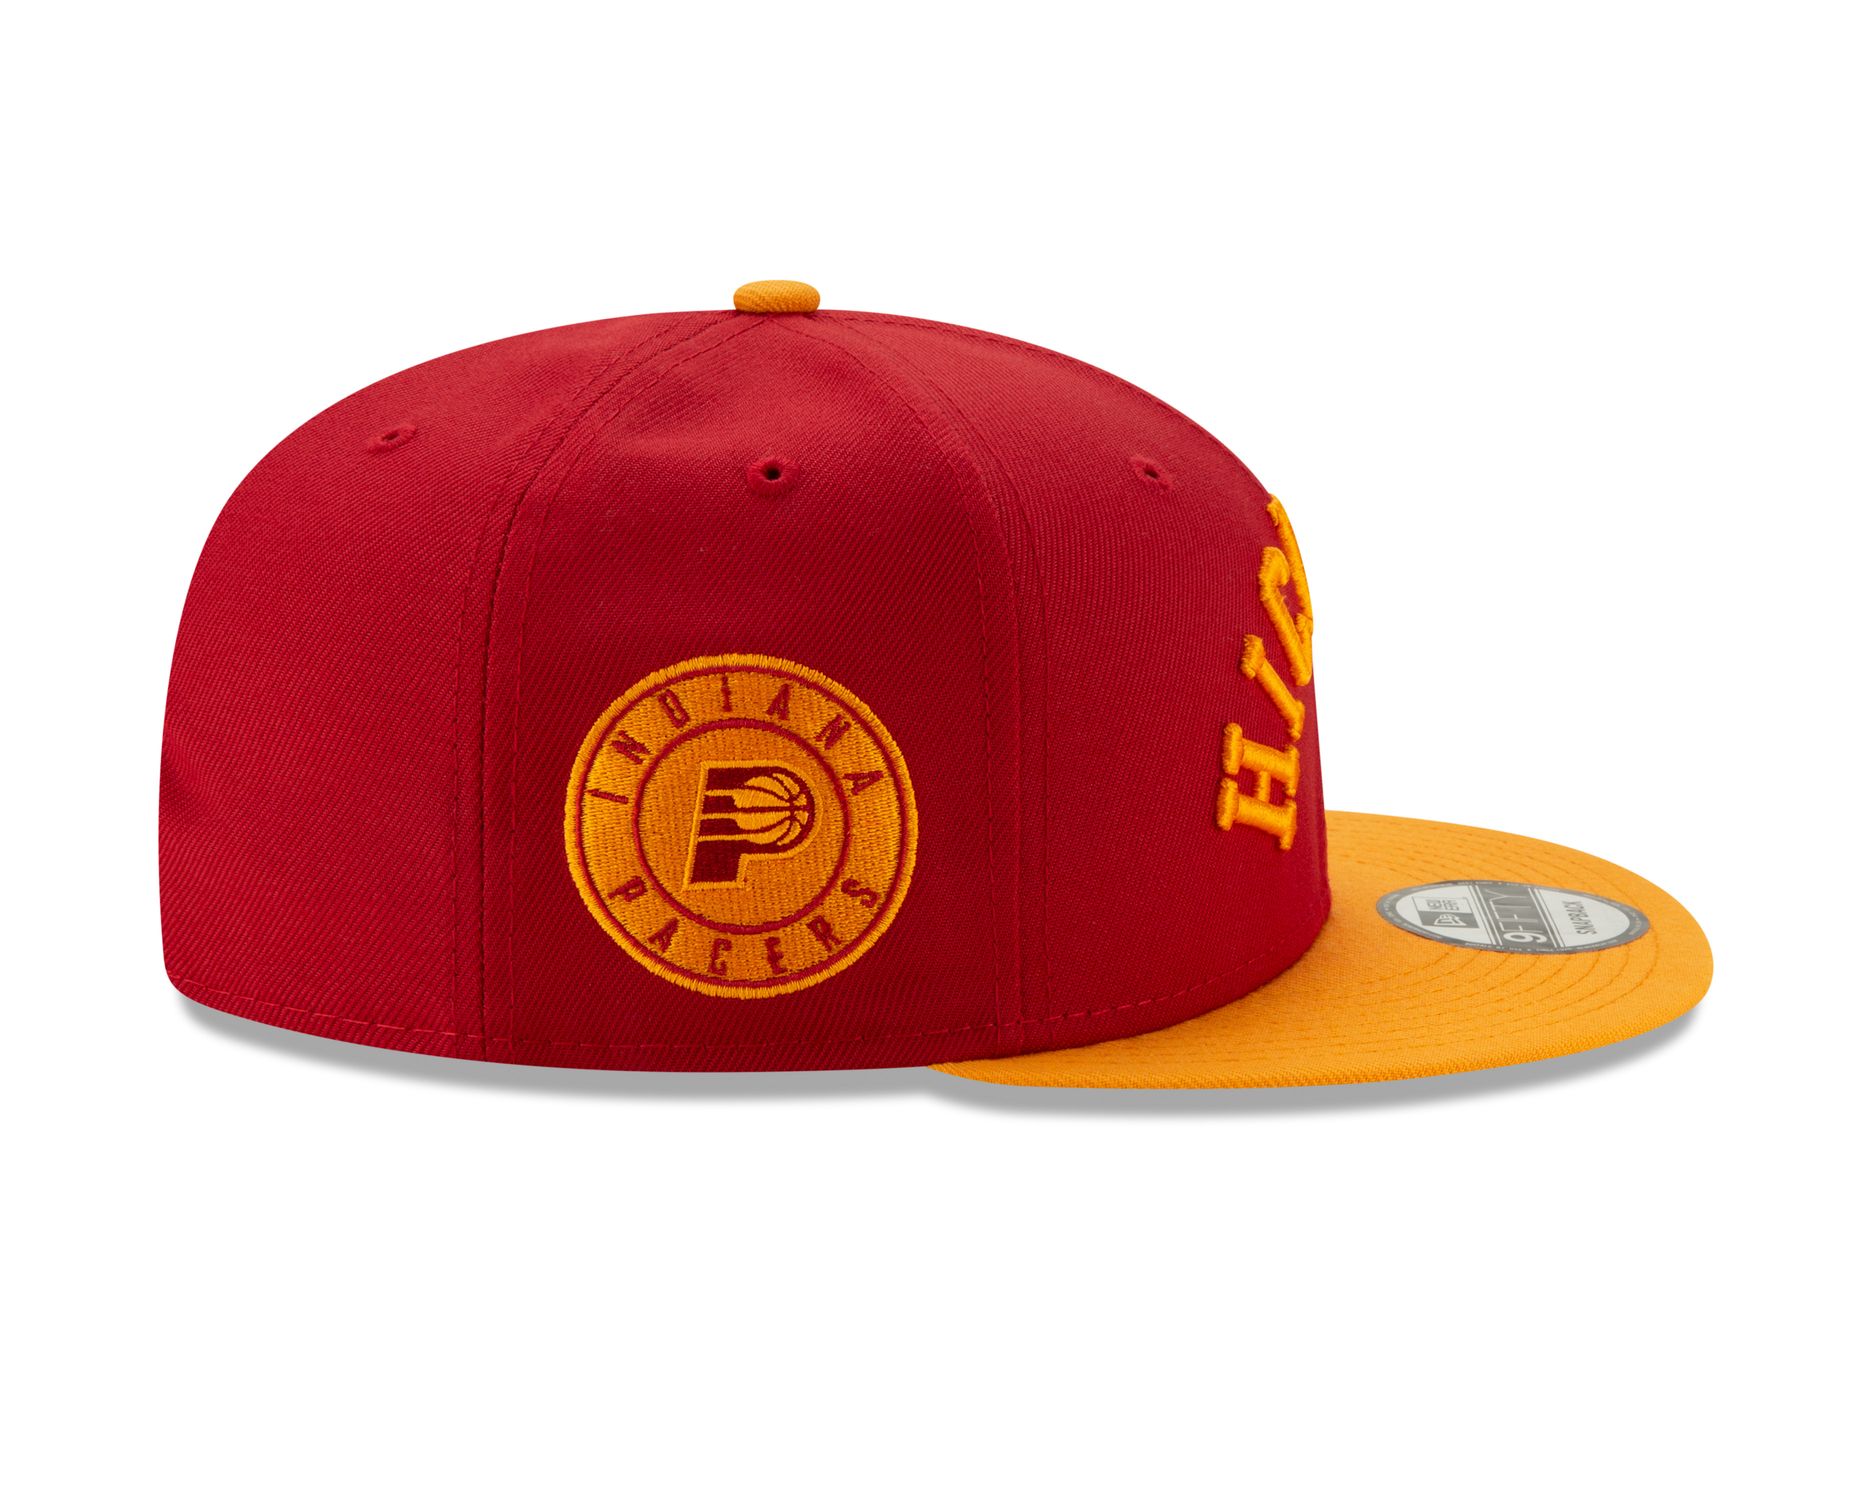 New Era Indiana Pacers Hard Wood Classic 9Fifty Cap